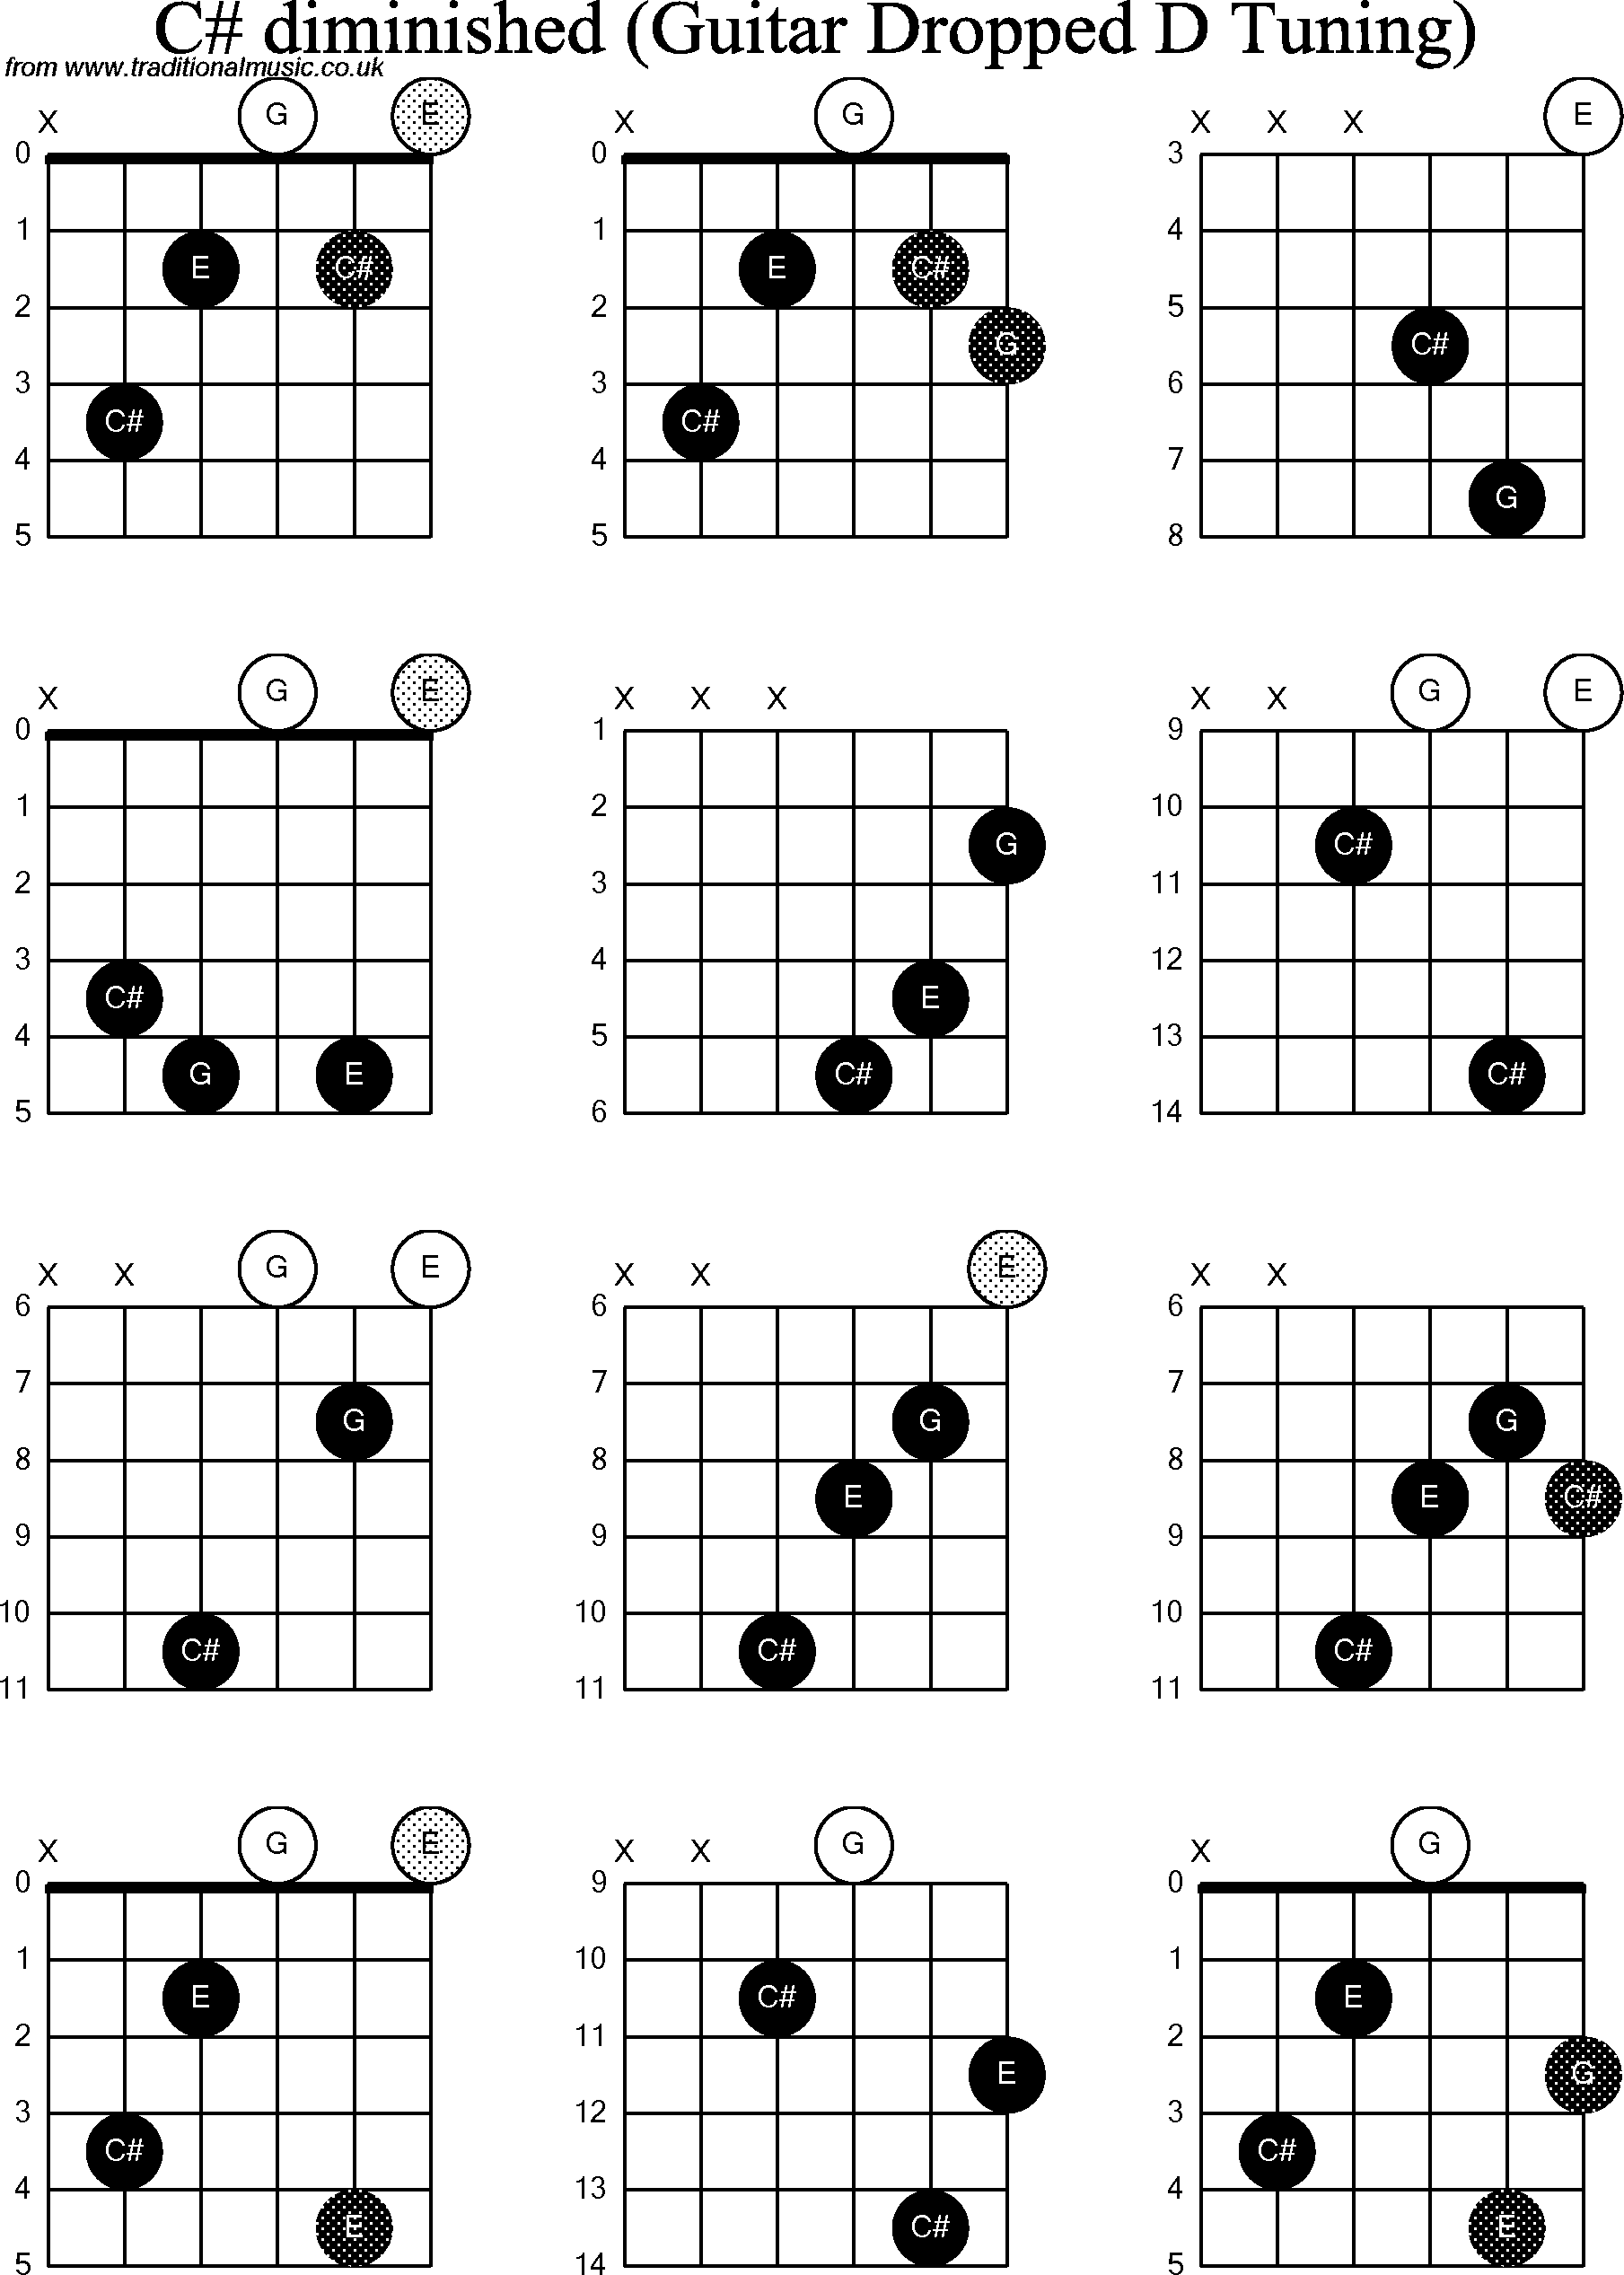 C Sharp D Flat Diminished Guitar Chord Diagrams | Hot Sex Picture